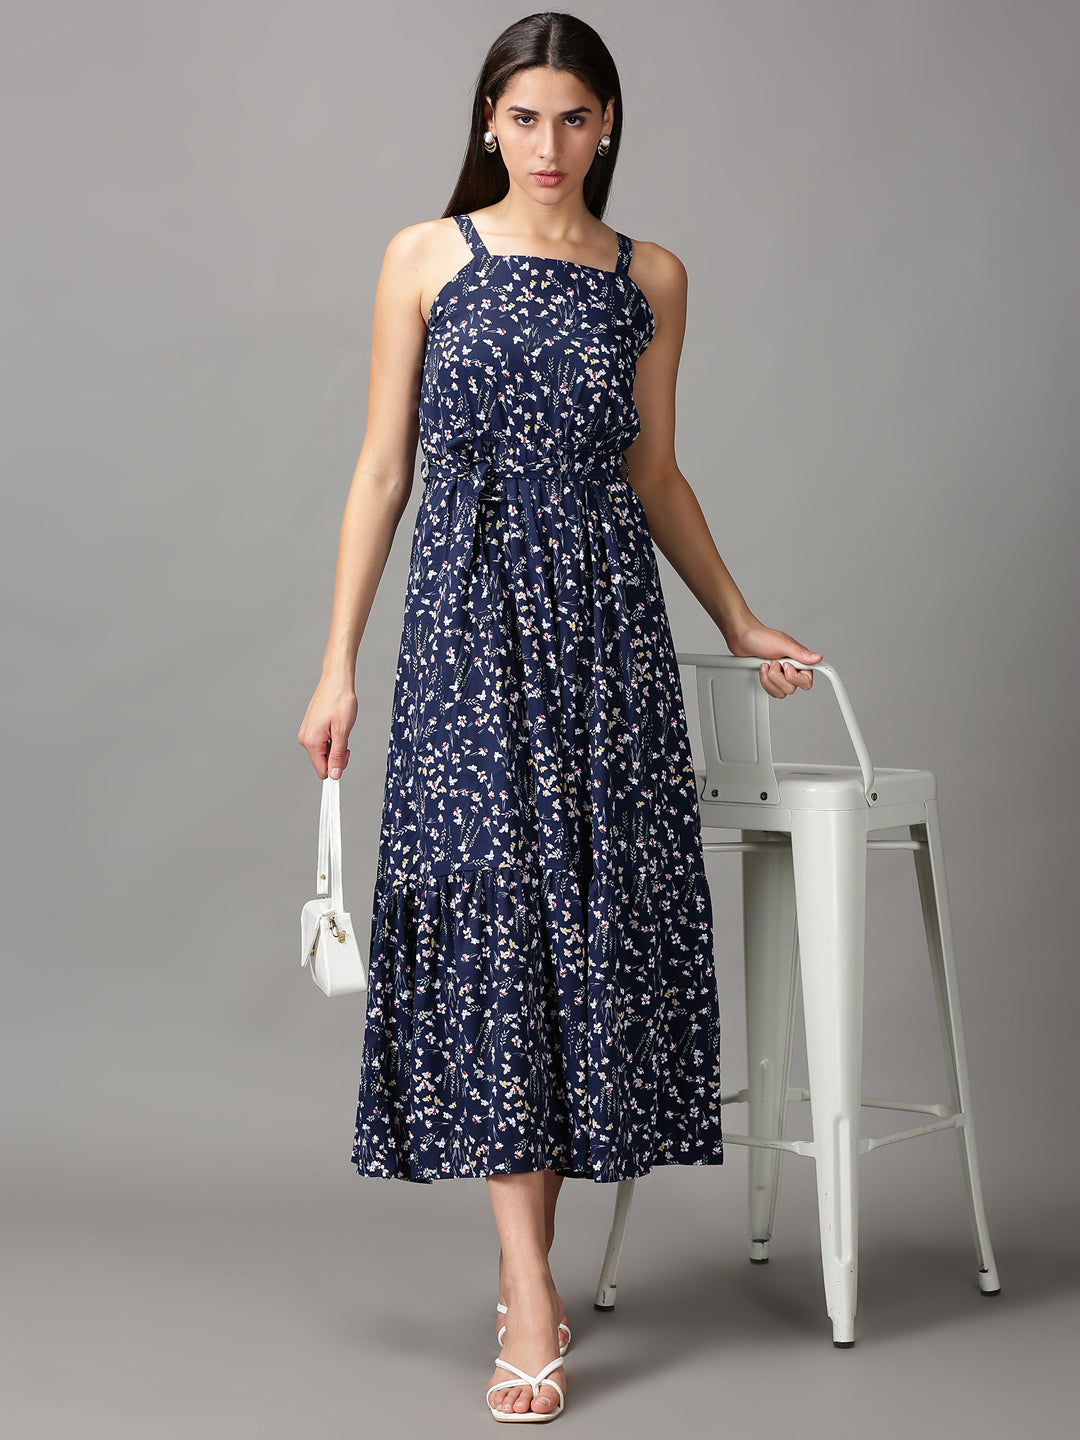 Women's Navy Blue Floral Fit and Flare Dress